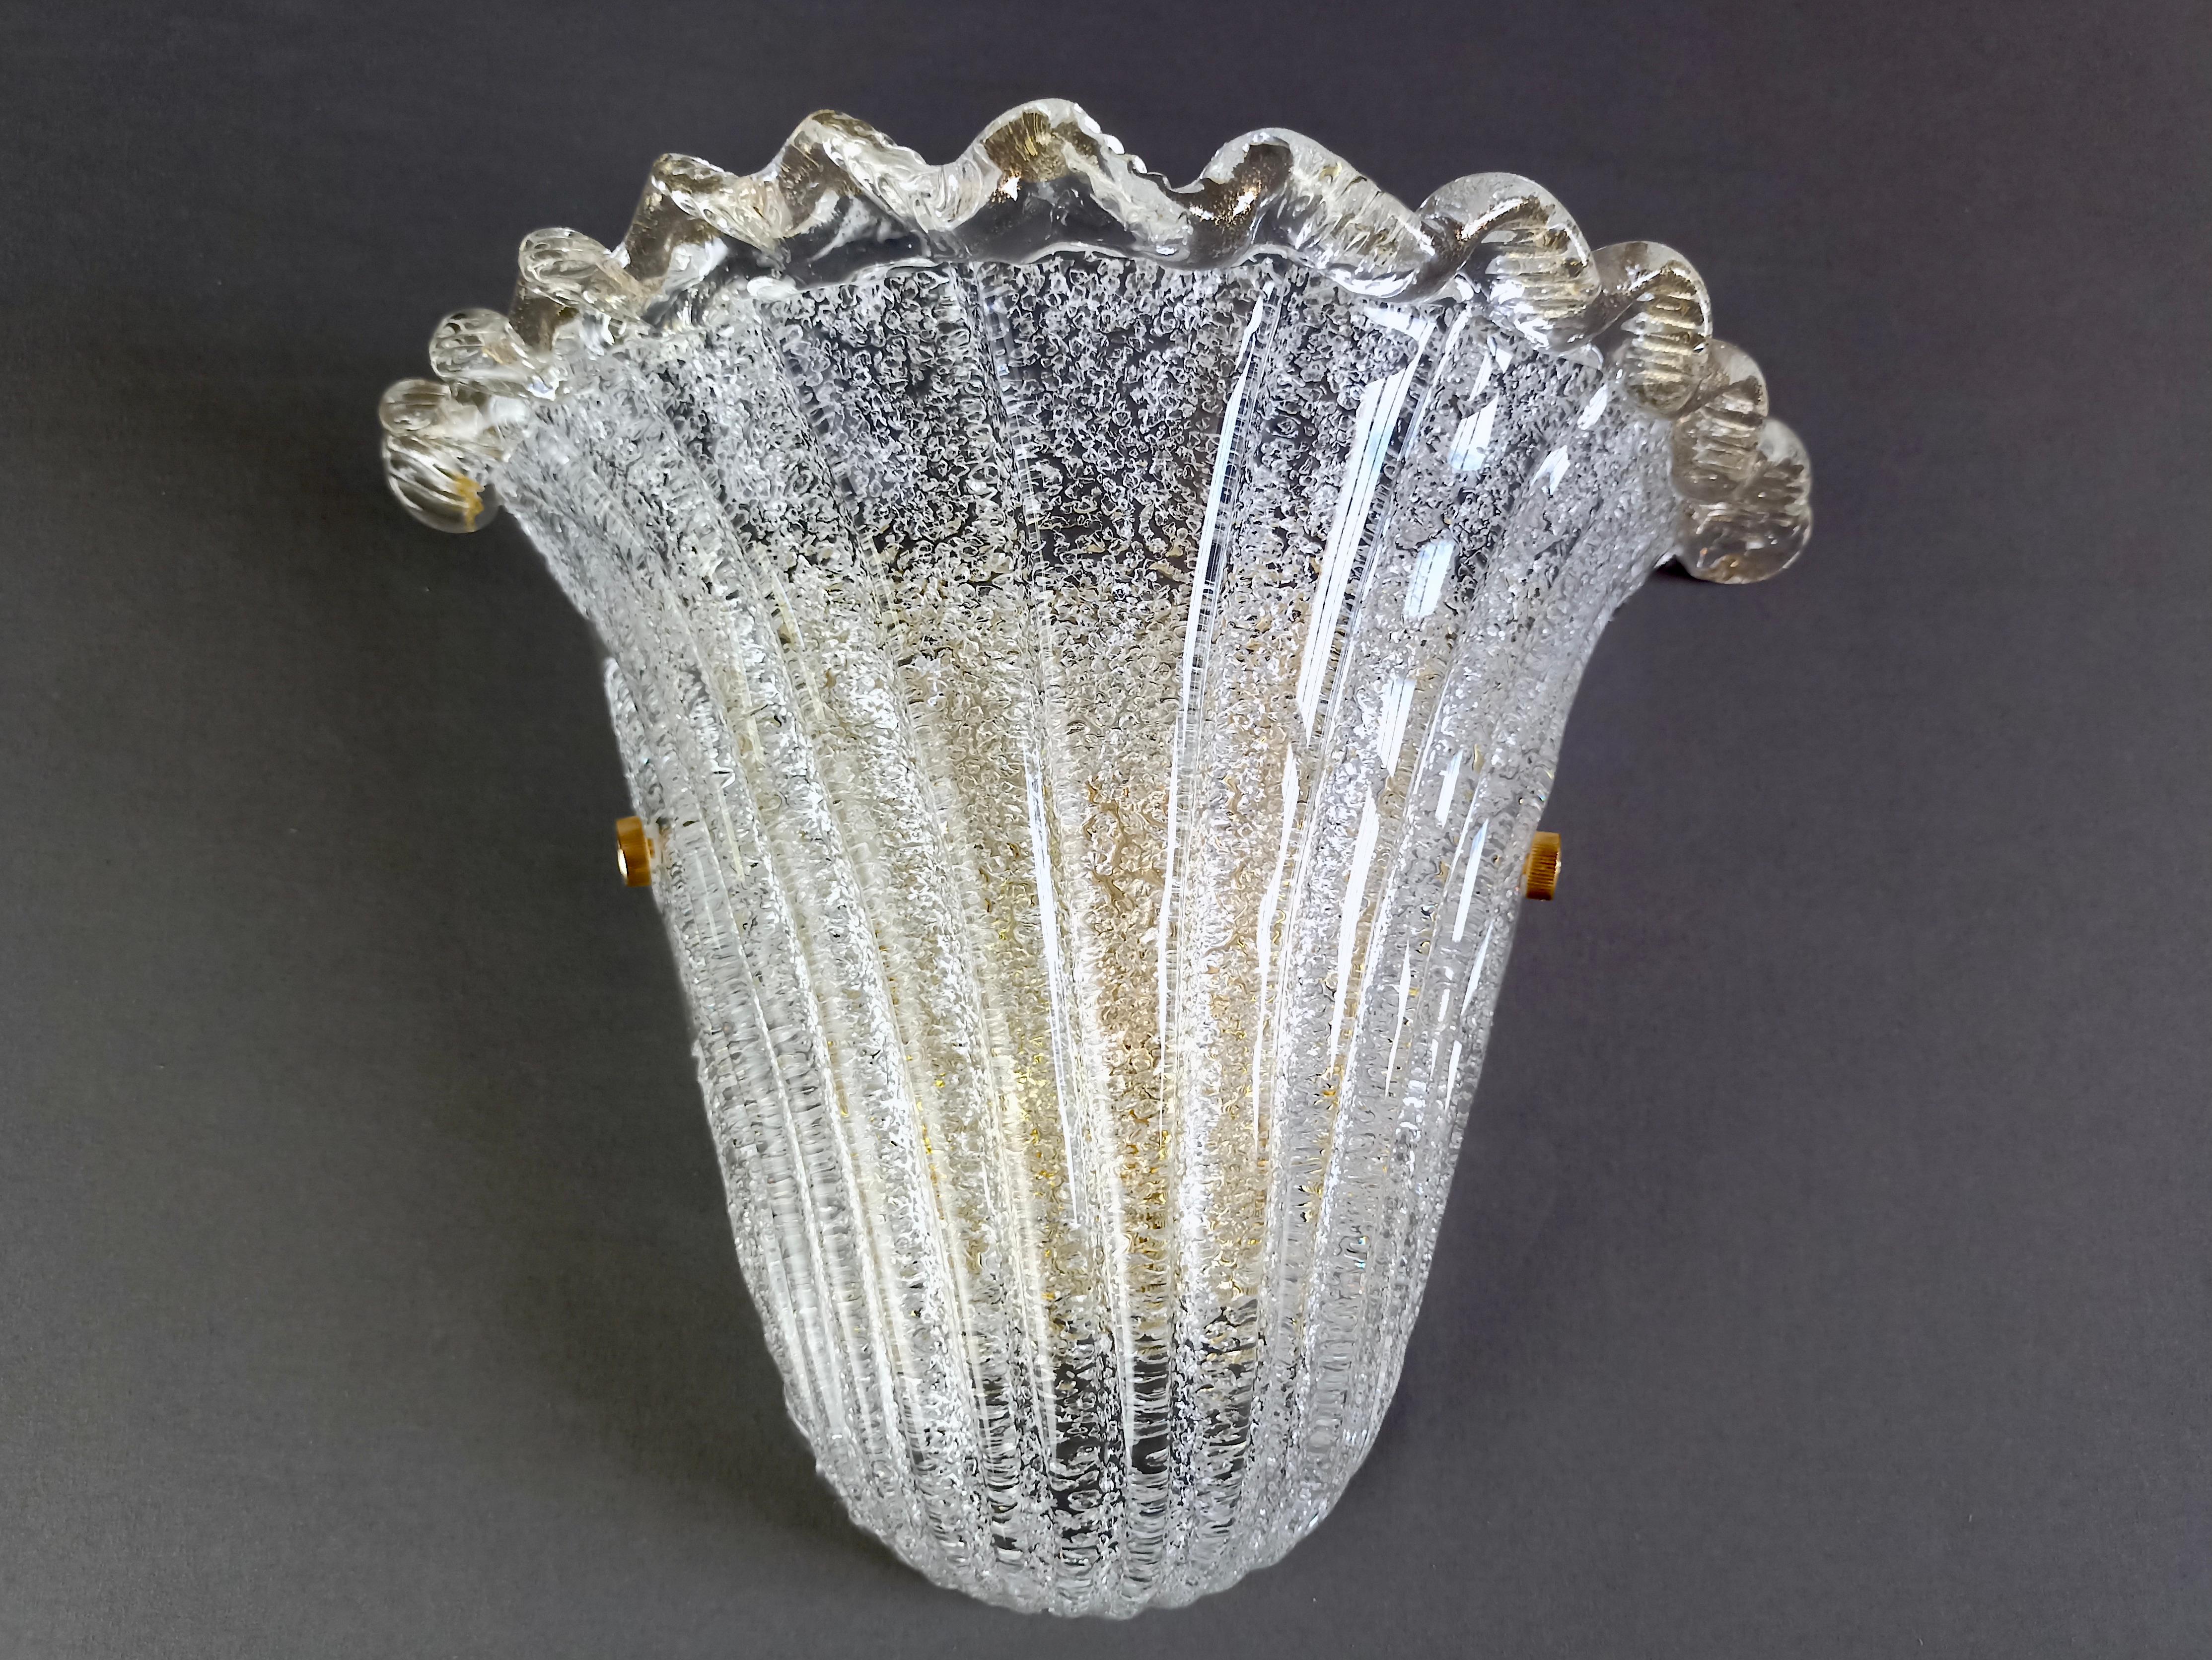 Fascinating 1990s Murano art glass shell wall lamp in Barovier's classic Venetian style. 
The clear, smooth ribbed glass lampshade feature a stunning effect, achieved by the hot application of dense, minute flakes of glass in the inner parts,